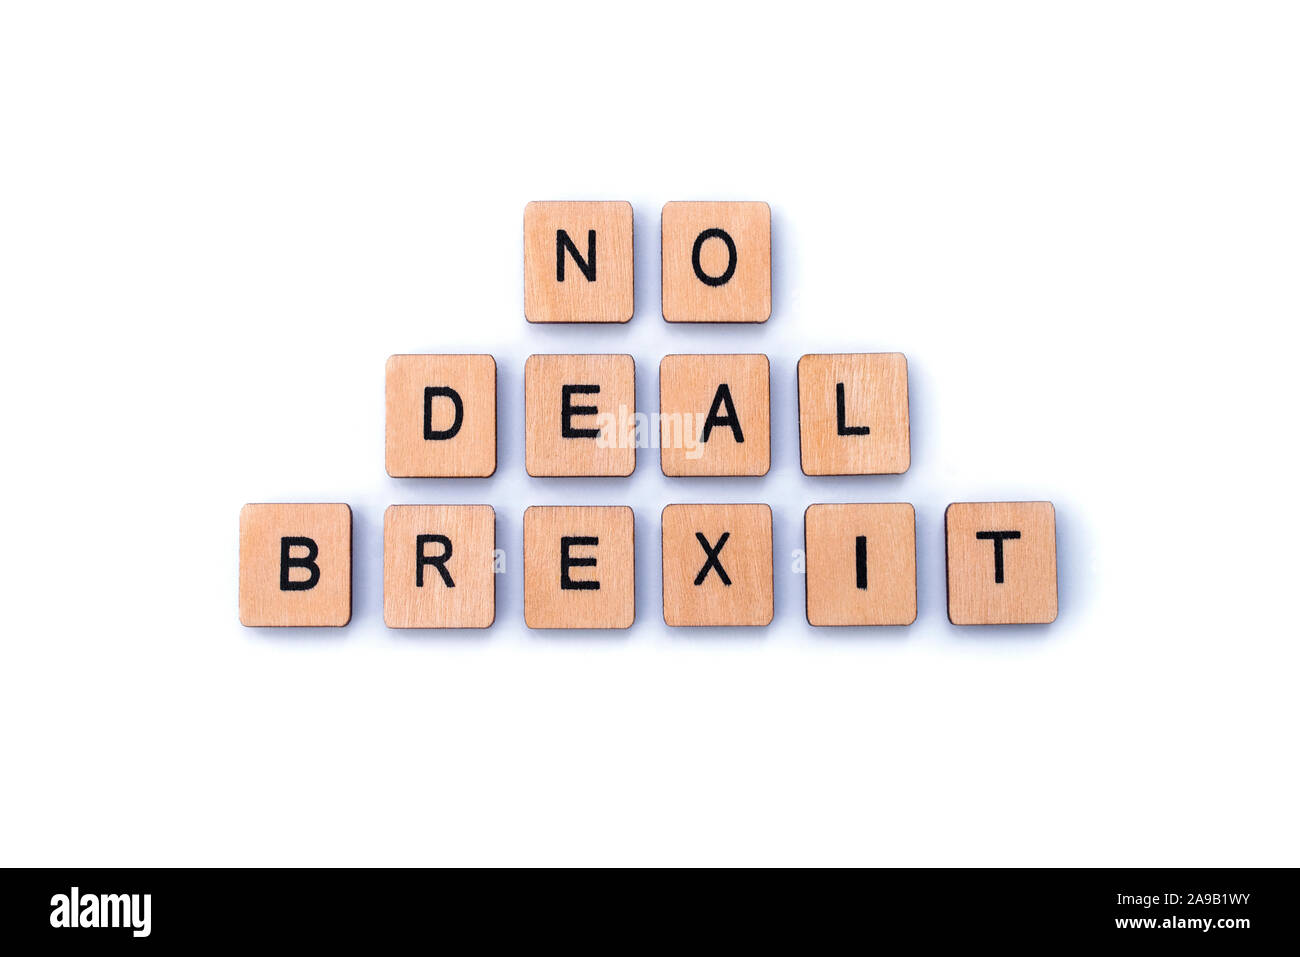 NO DEAL BREXIT, spelt out with wooden letter tiles. Stock Photo